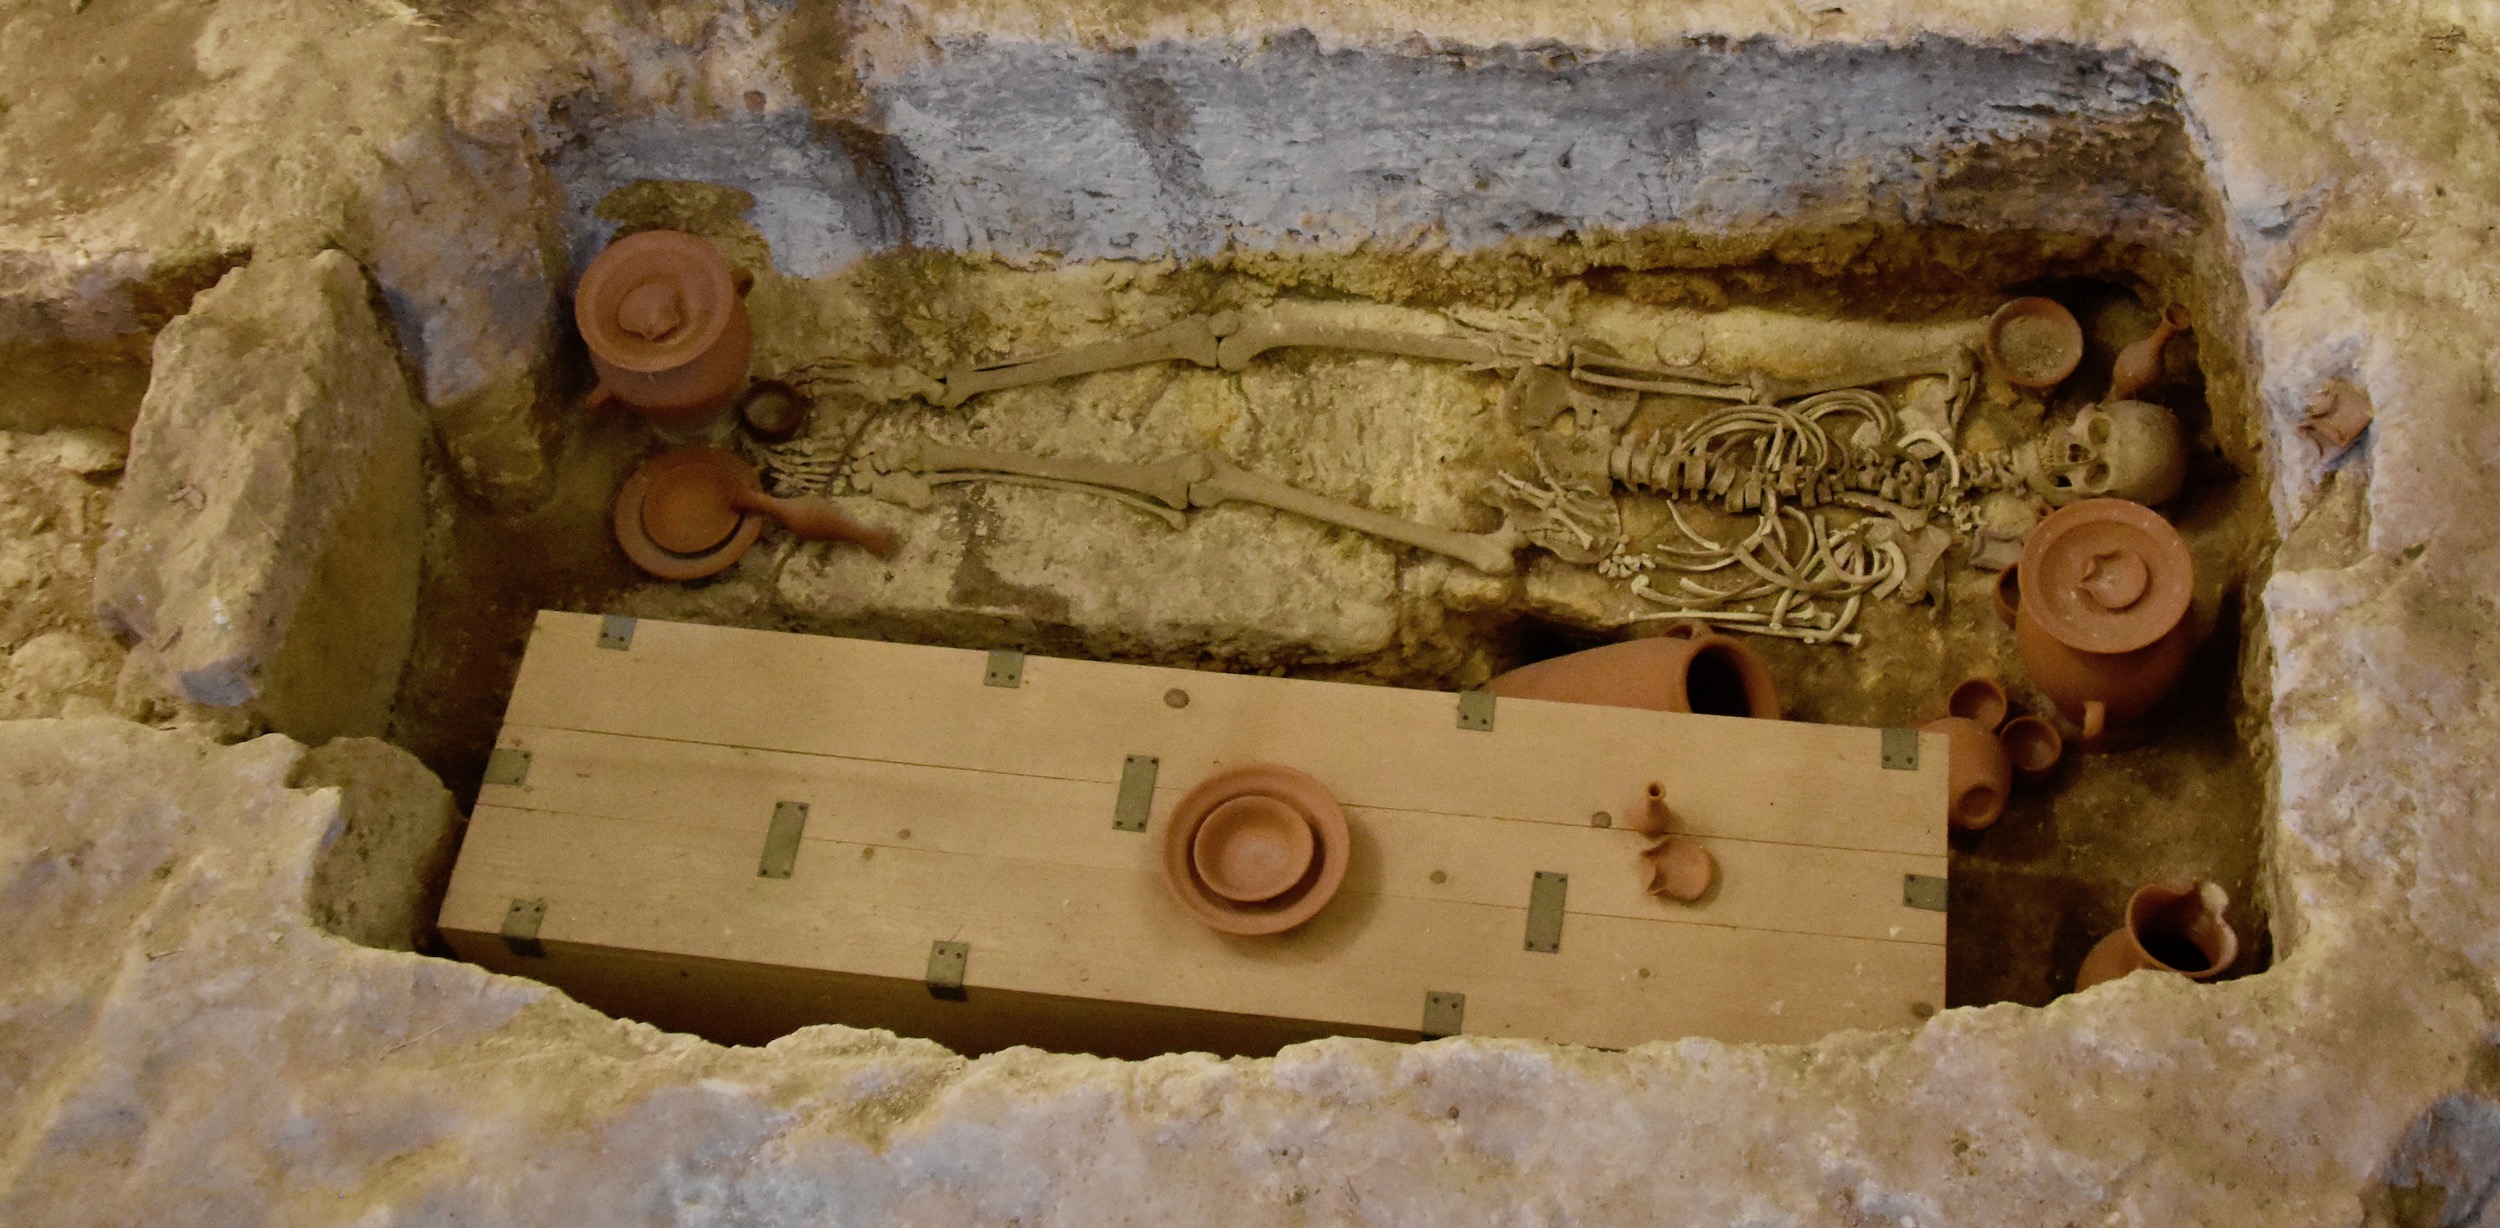 Three Types of Burial in the St. Paul's Catacombs